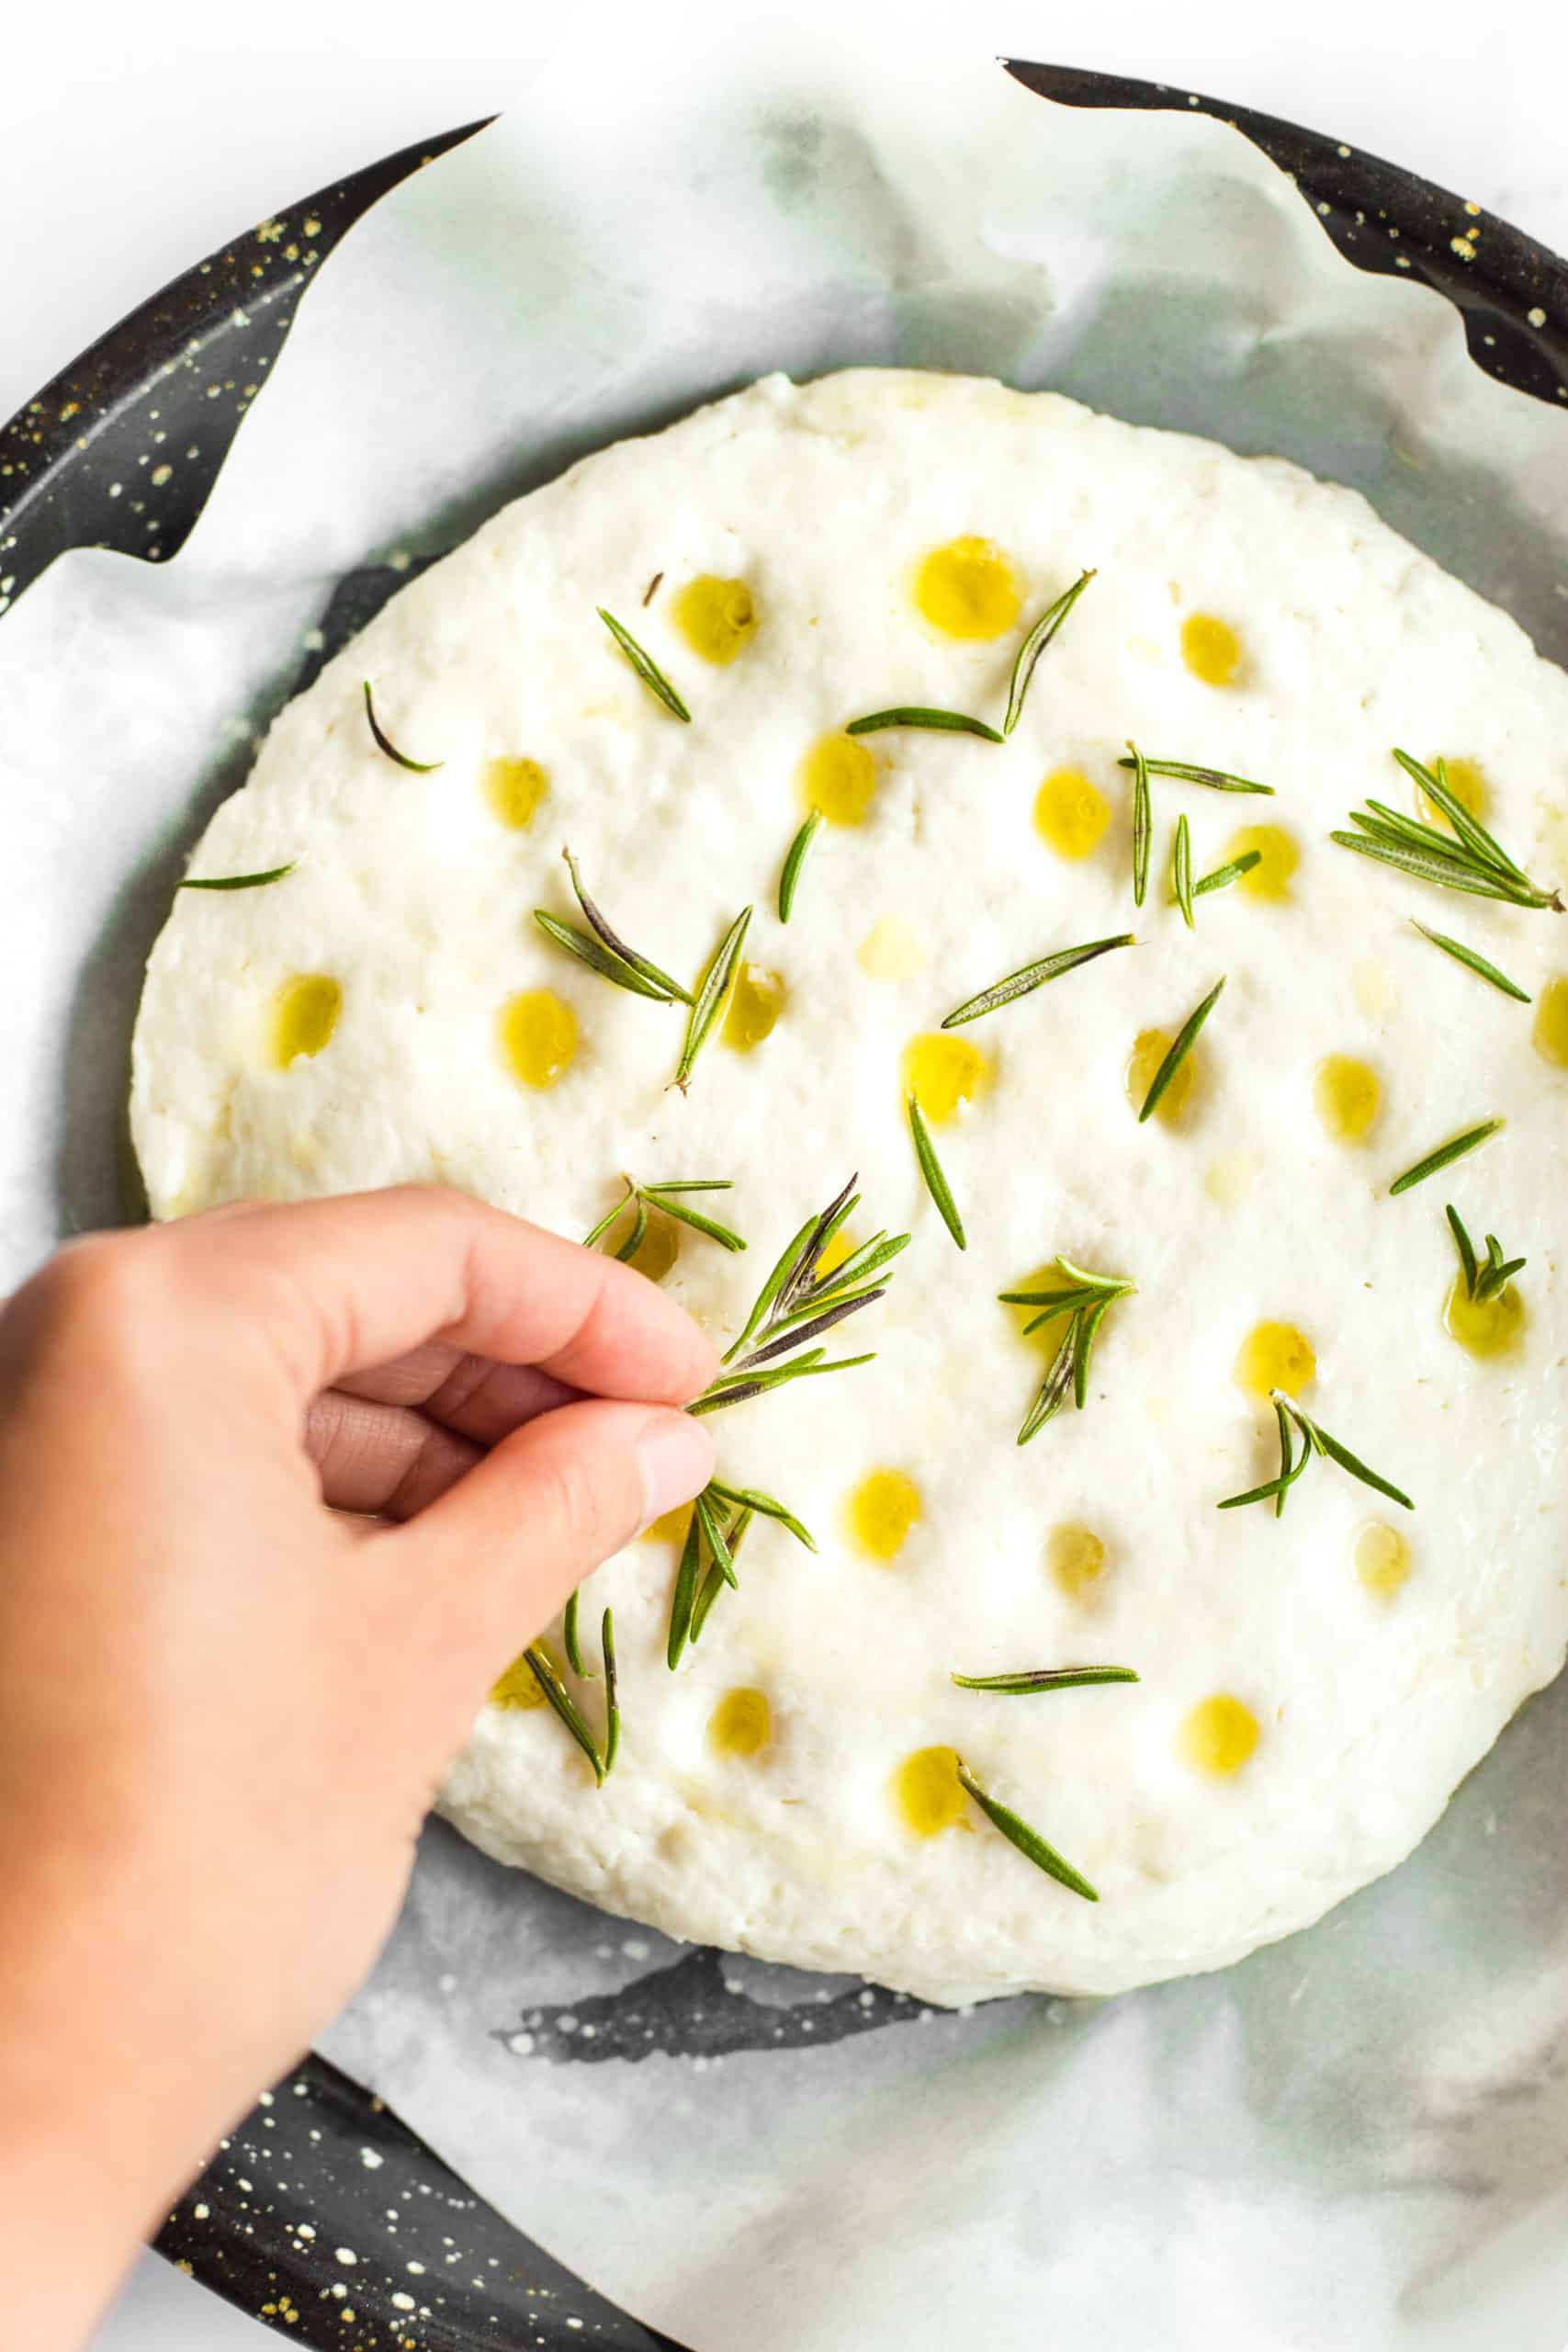 Sprinkling fresh rosemary leaves on top of focaccia dough.